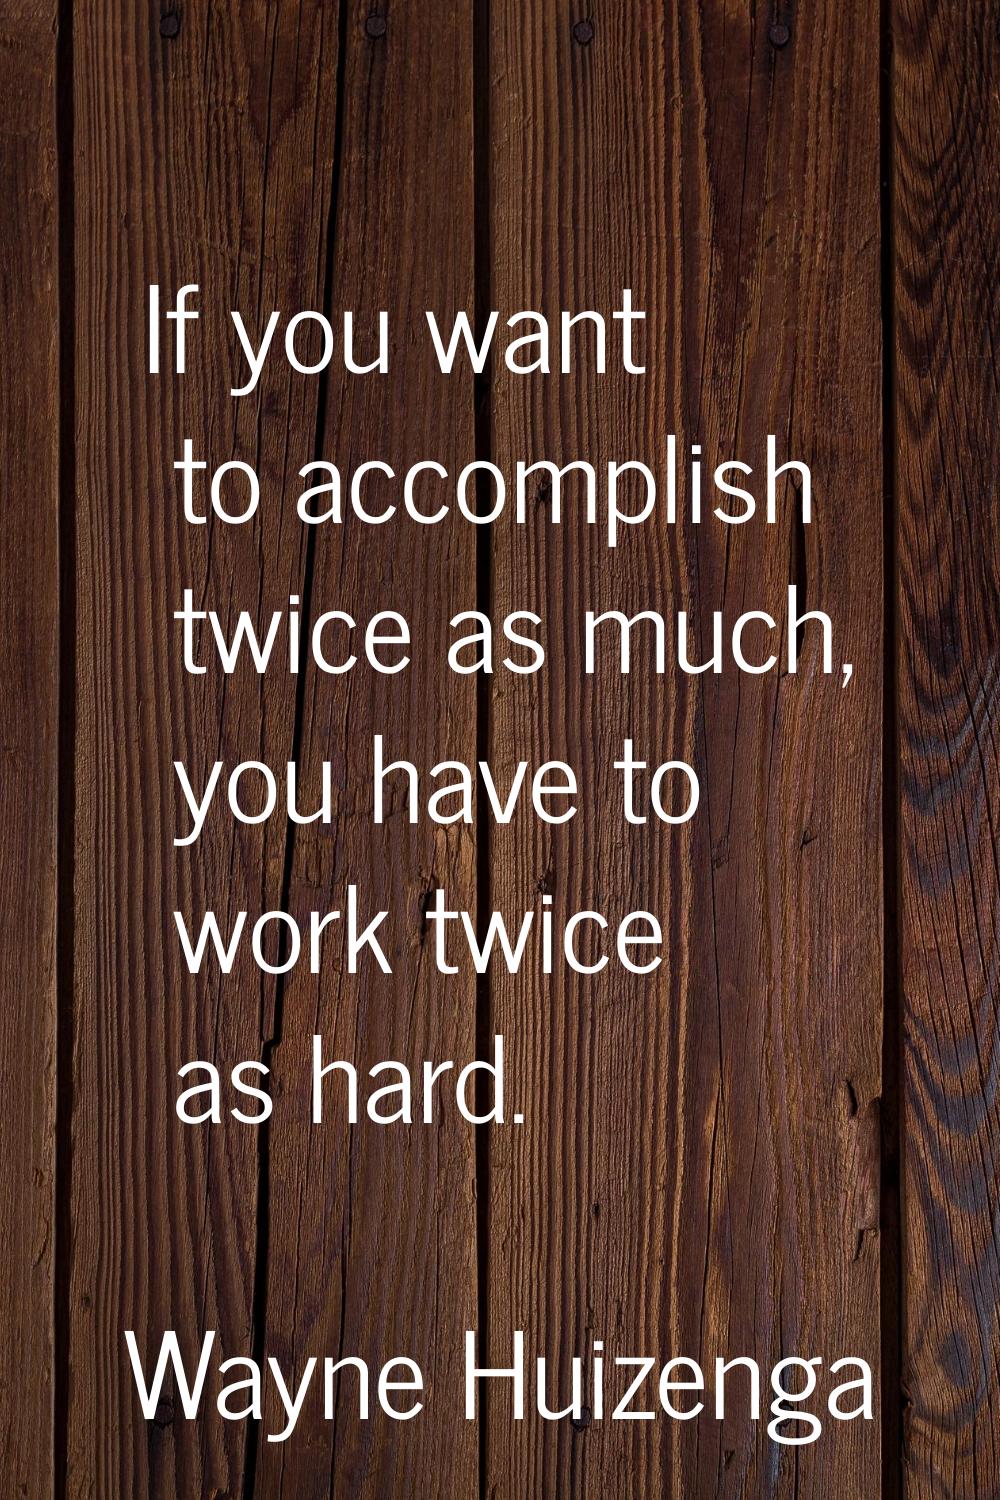 If you want to accomplish twice as much, you have to work twice as hard.